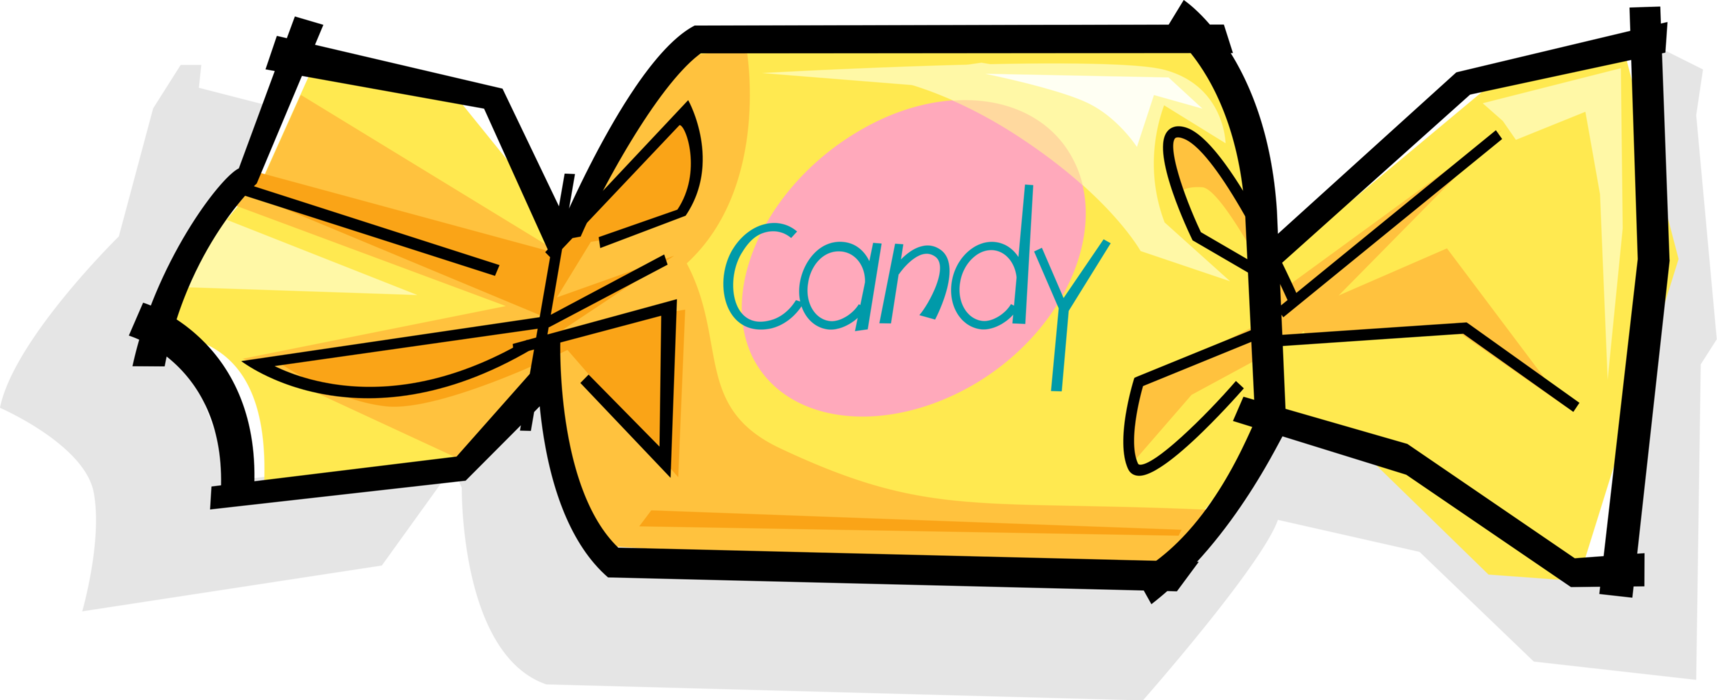 Vector Illustration of Wrapped Hard Candy Confection